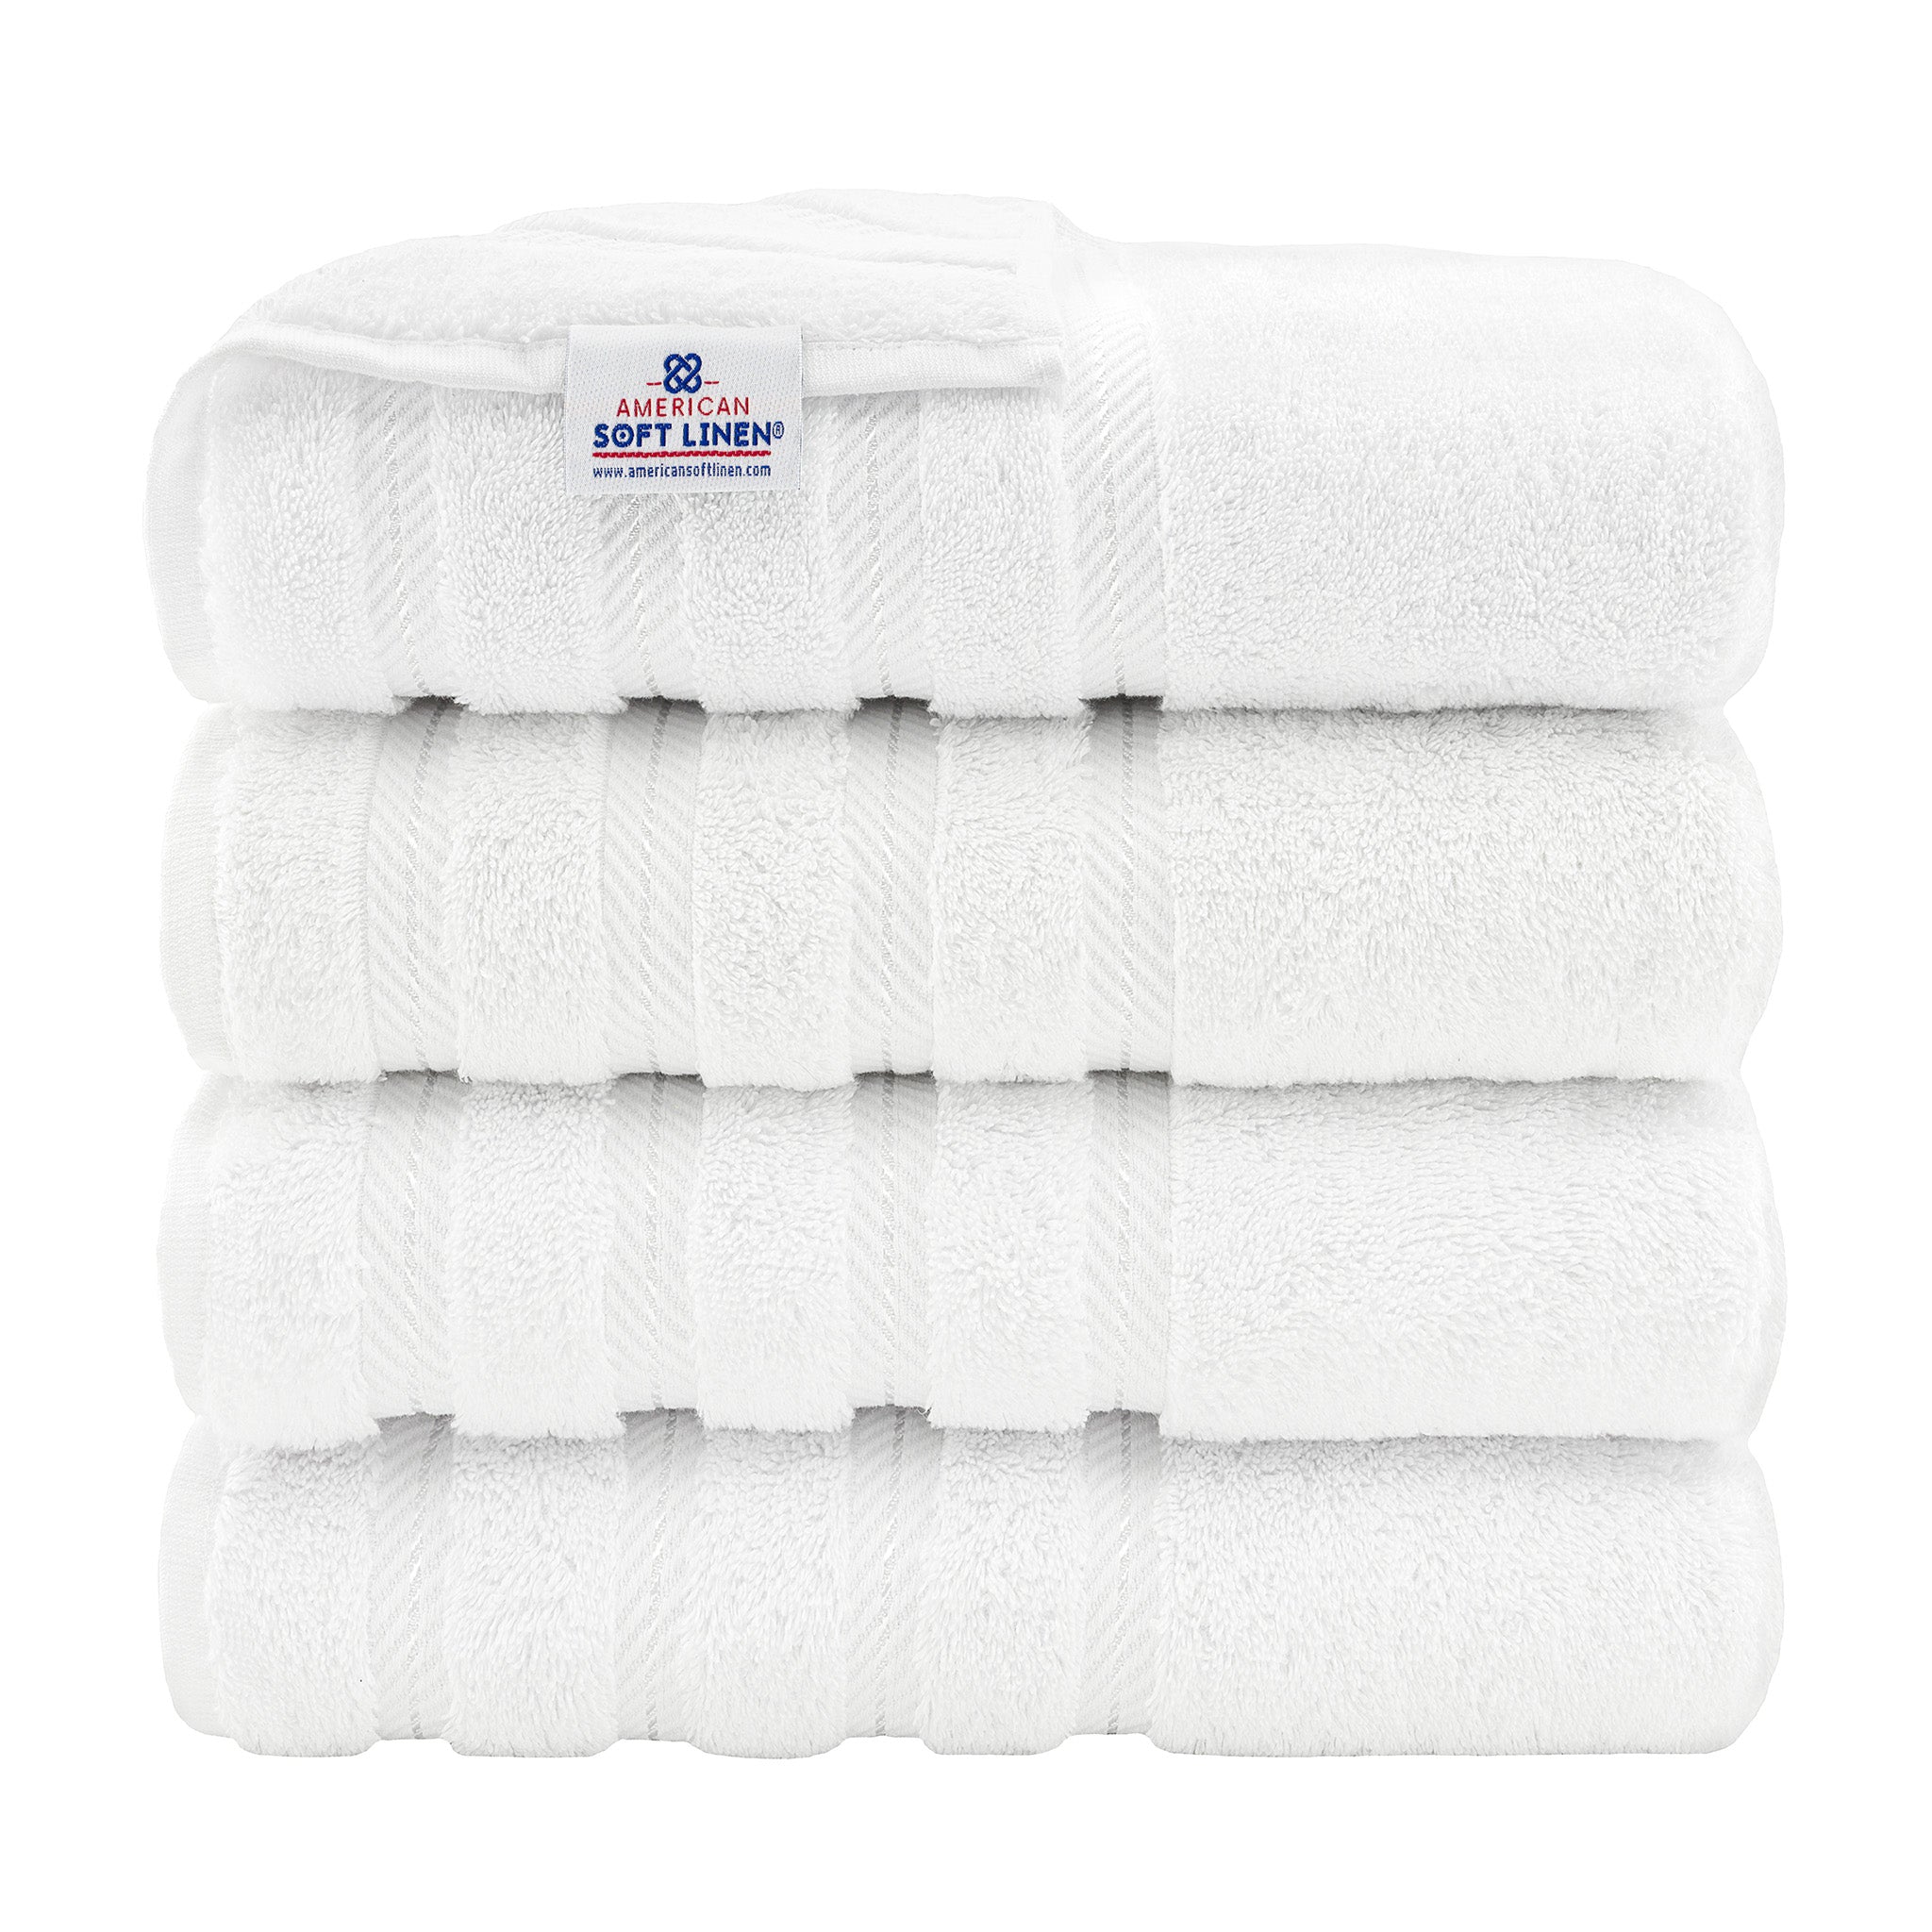 Wholesale Soft Color Combed Weave Bath Towels Manufacturers & Suppliers in  USA, UK, Australia